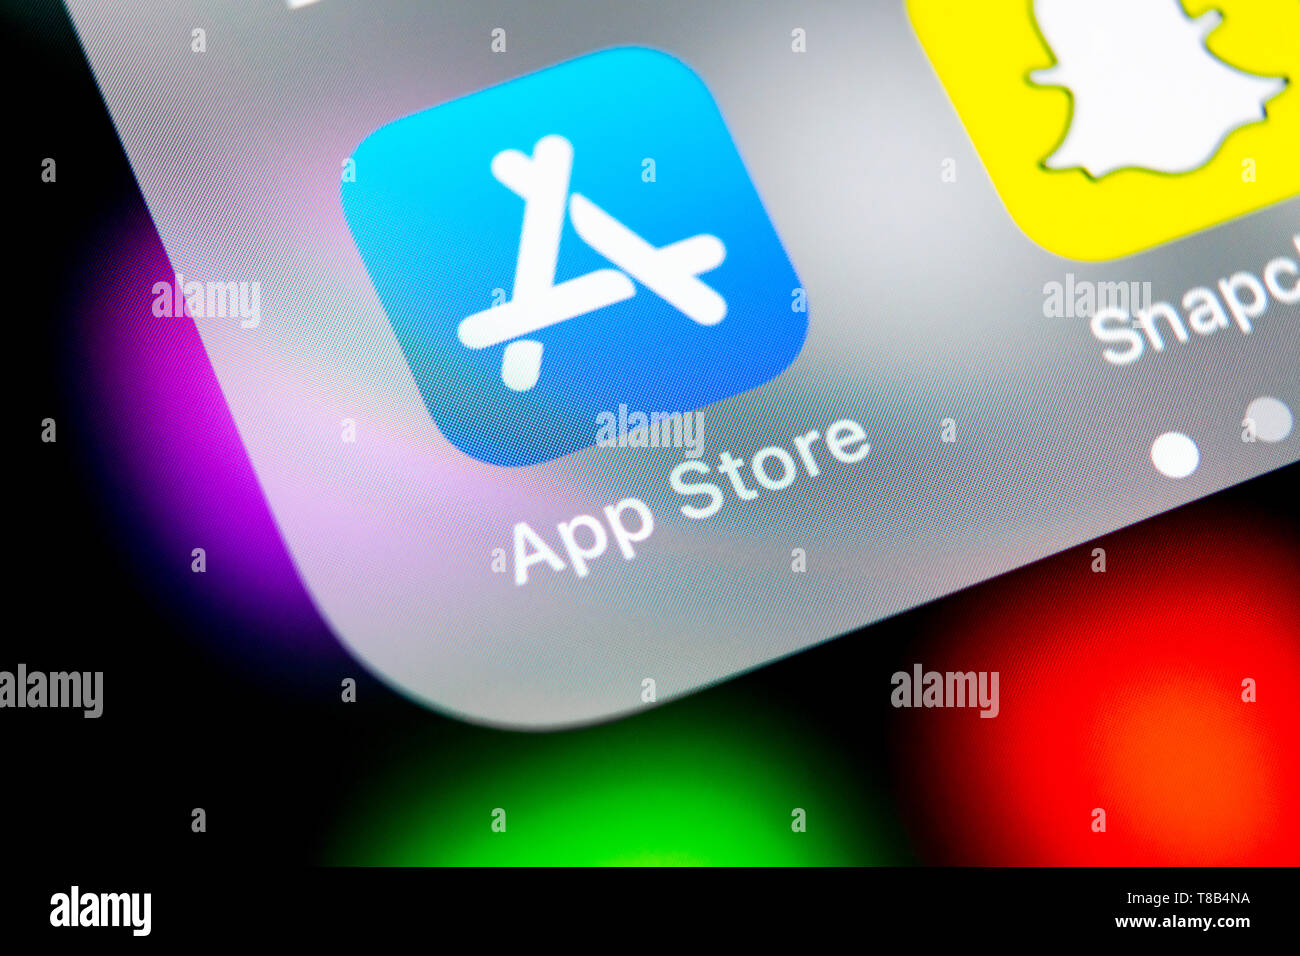 Sankt-Petersburg, Russia, August 16, 2018: Apple store application icon on Apple iPhone X smartphone screen close-up. Mobile application icon of app s Stock Photo